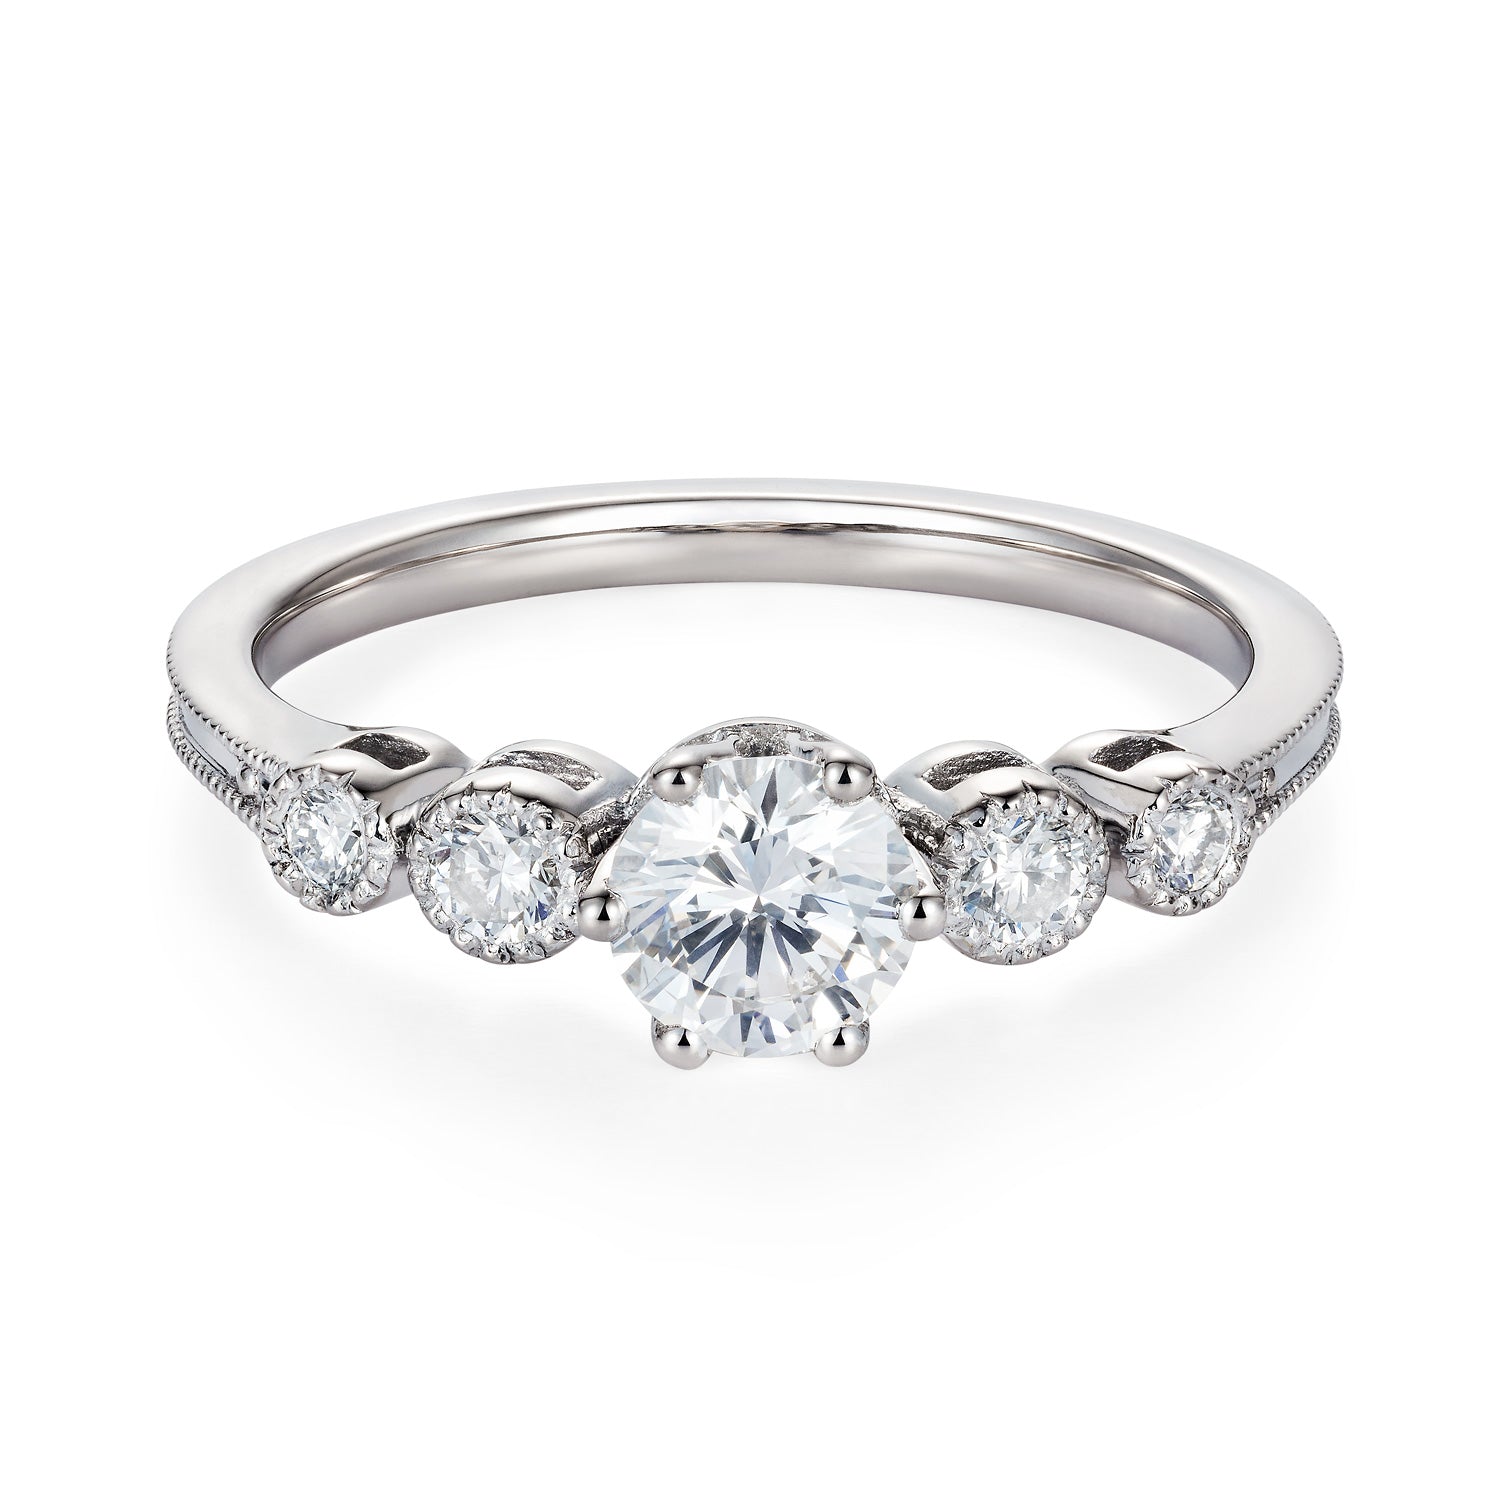 Queen Eleanor Engagement Ring by Yasmin Everley